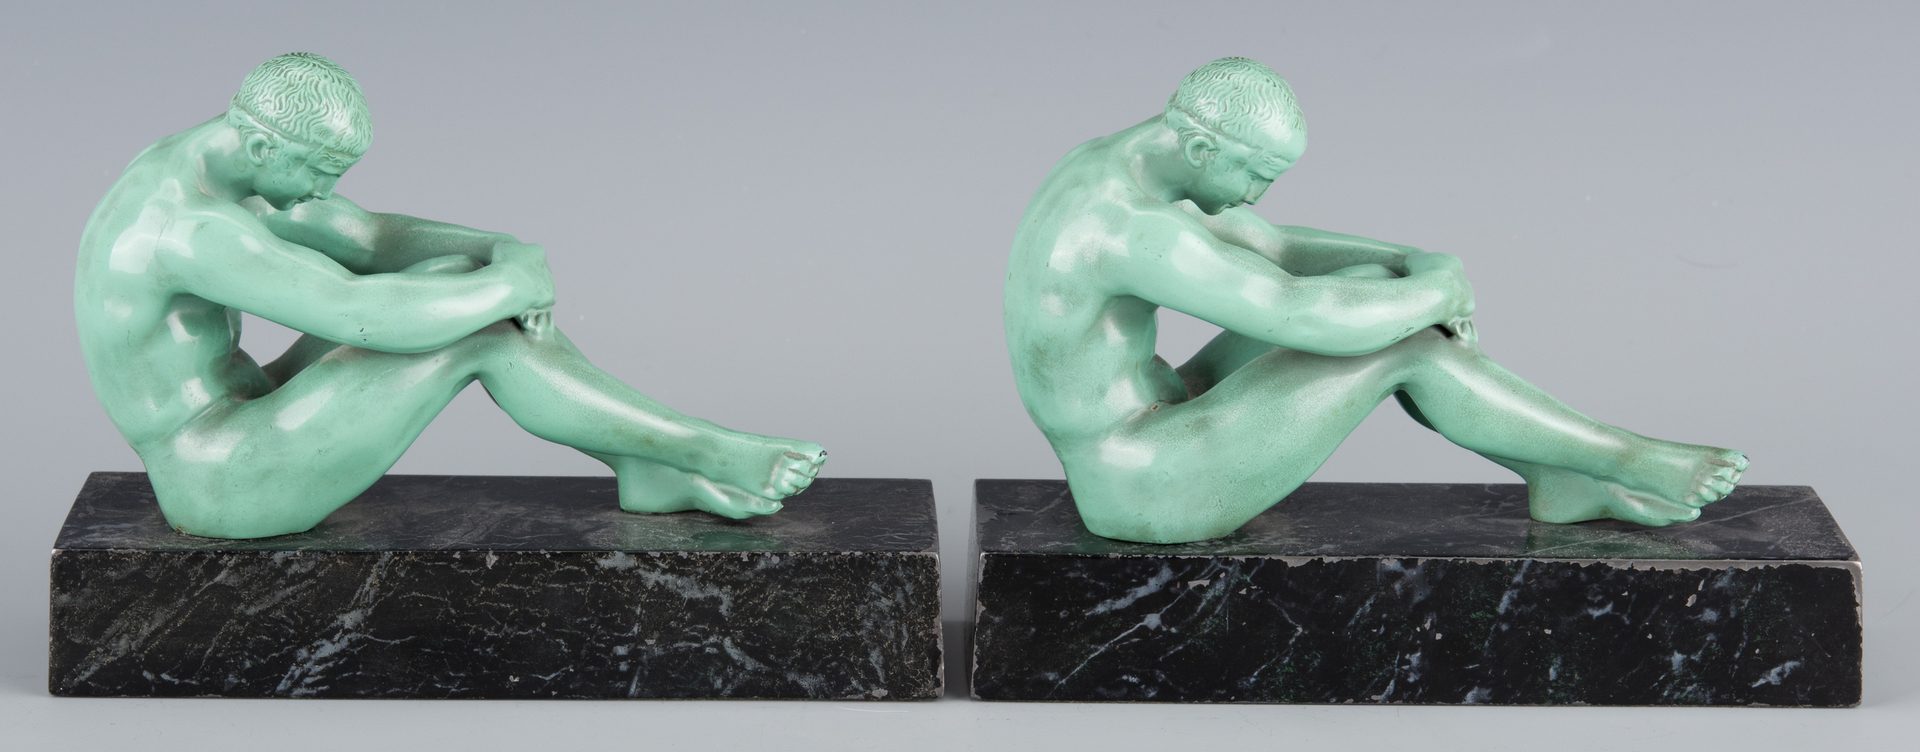 Lot 142: Dodge Sterling Awards w/ Art Deco bookends